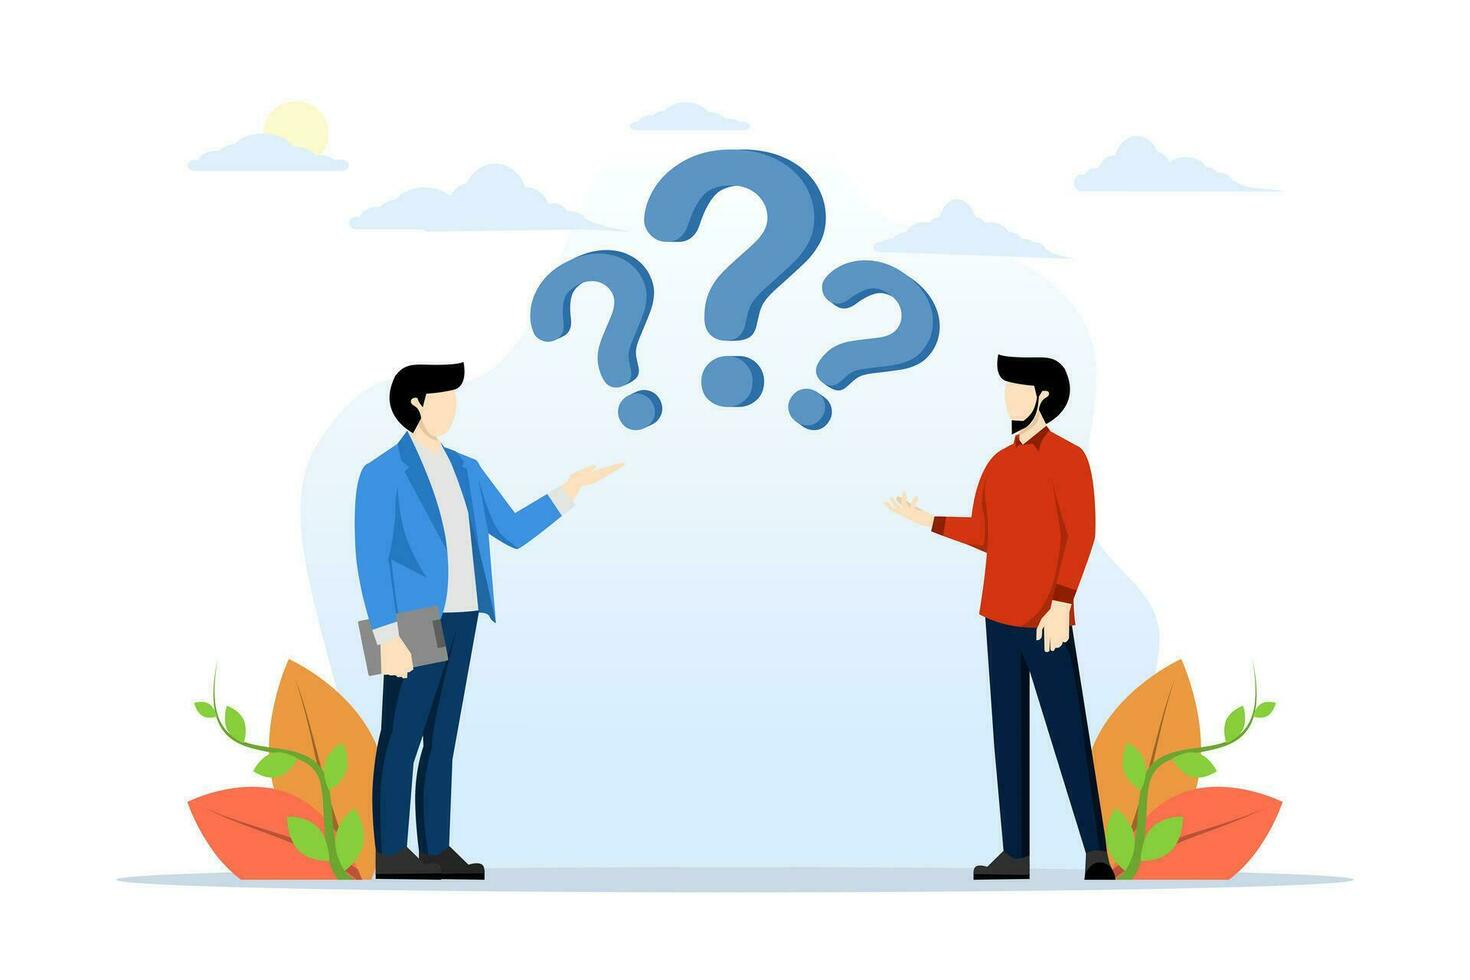 Frequently asked questions concept, people around question mark, suitable for web design, banner, mobile app, landing page, flat vector illustration on white background.